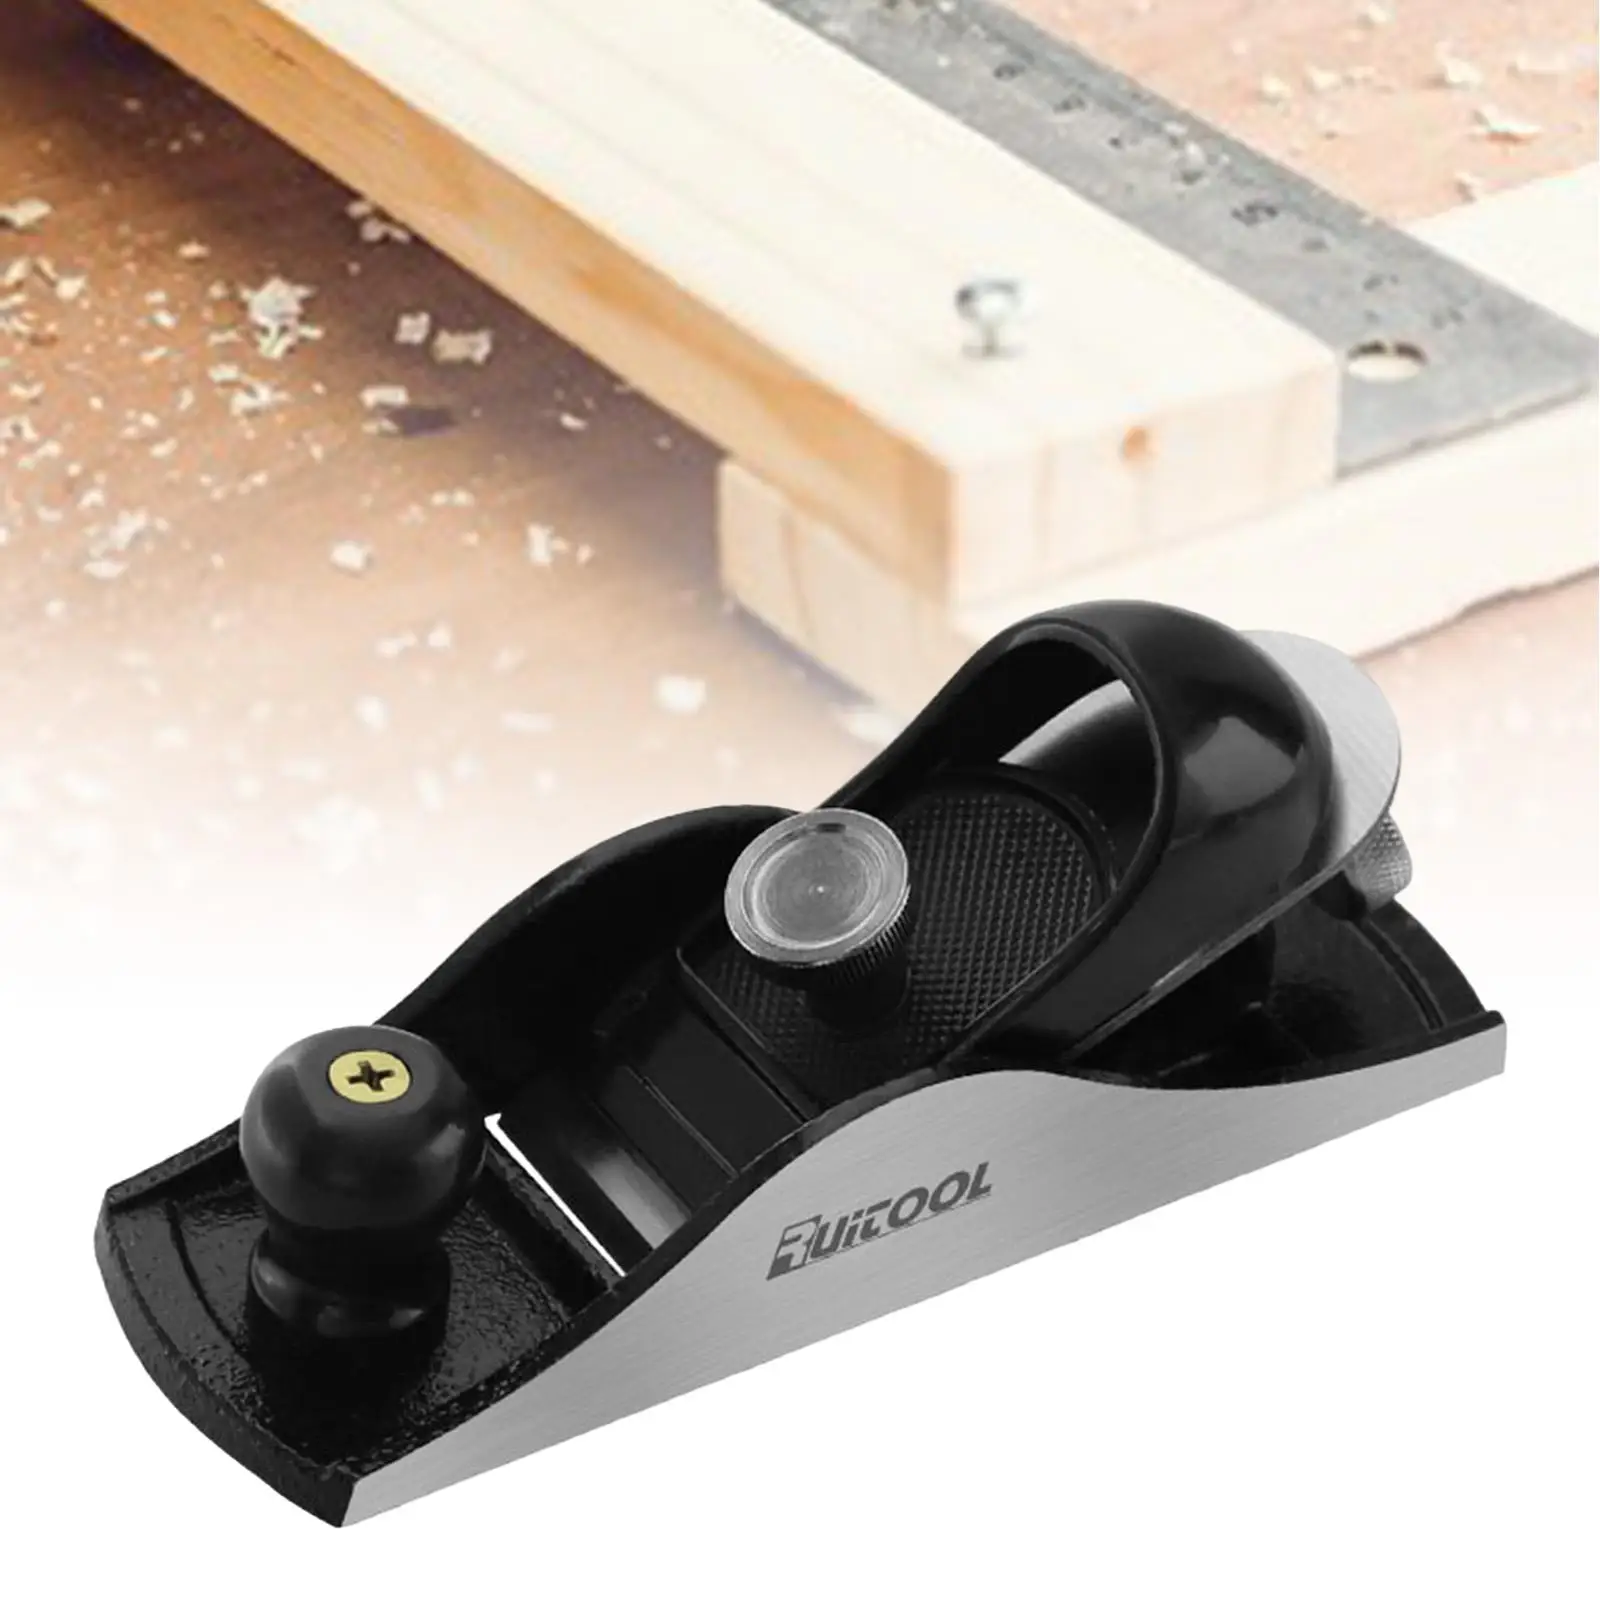 Wood Planer Smoothing Plane Gadgets Woodworking Planes Corner Plane Hand Plane for Chamfering Trimming Polishing Edges Furniture